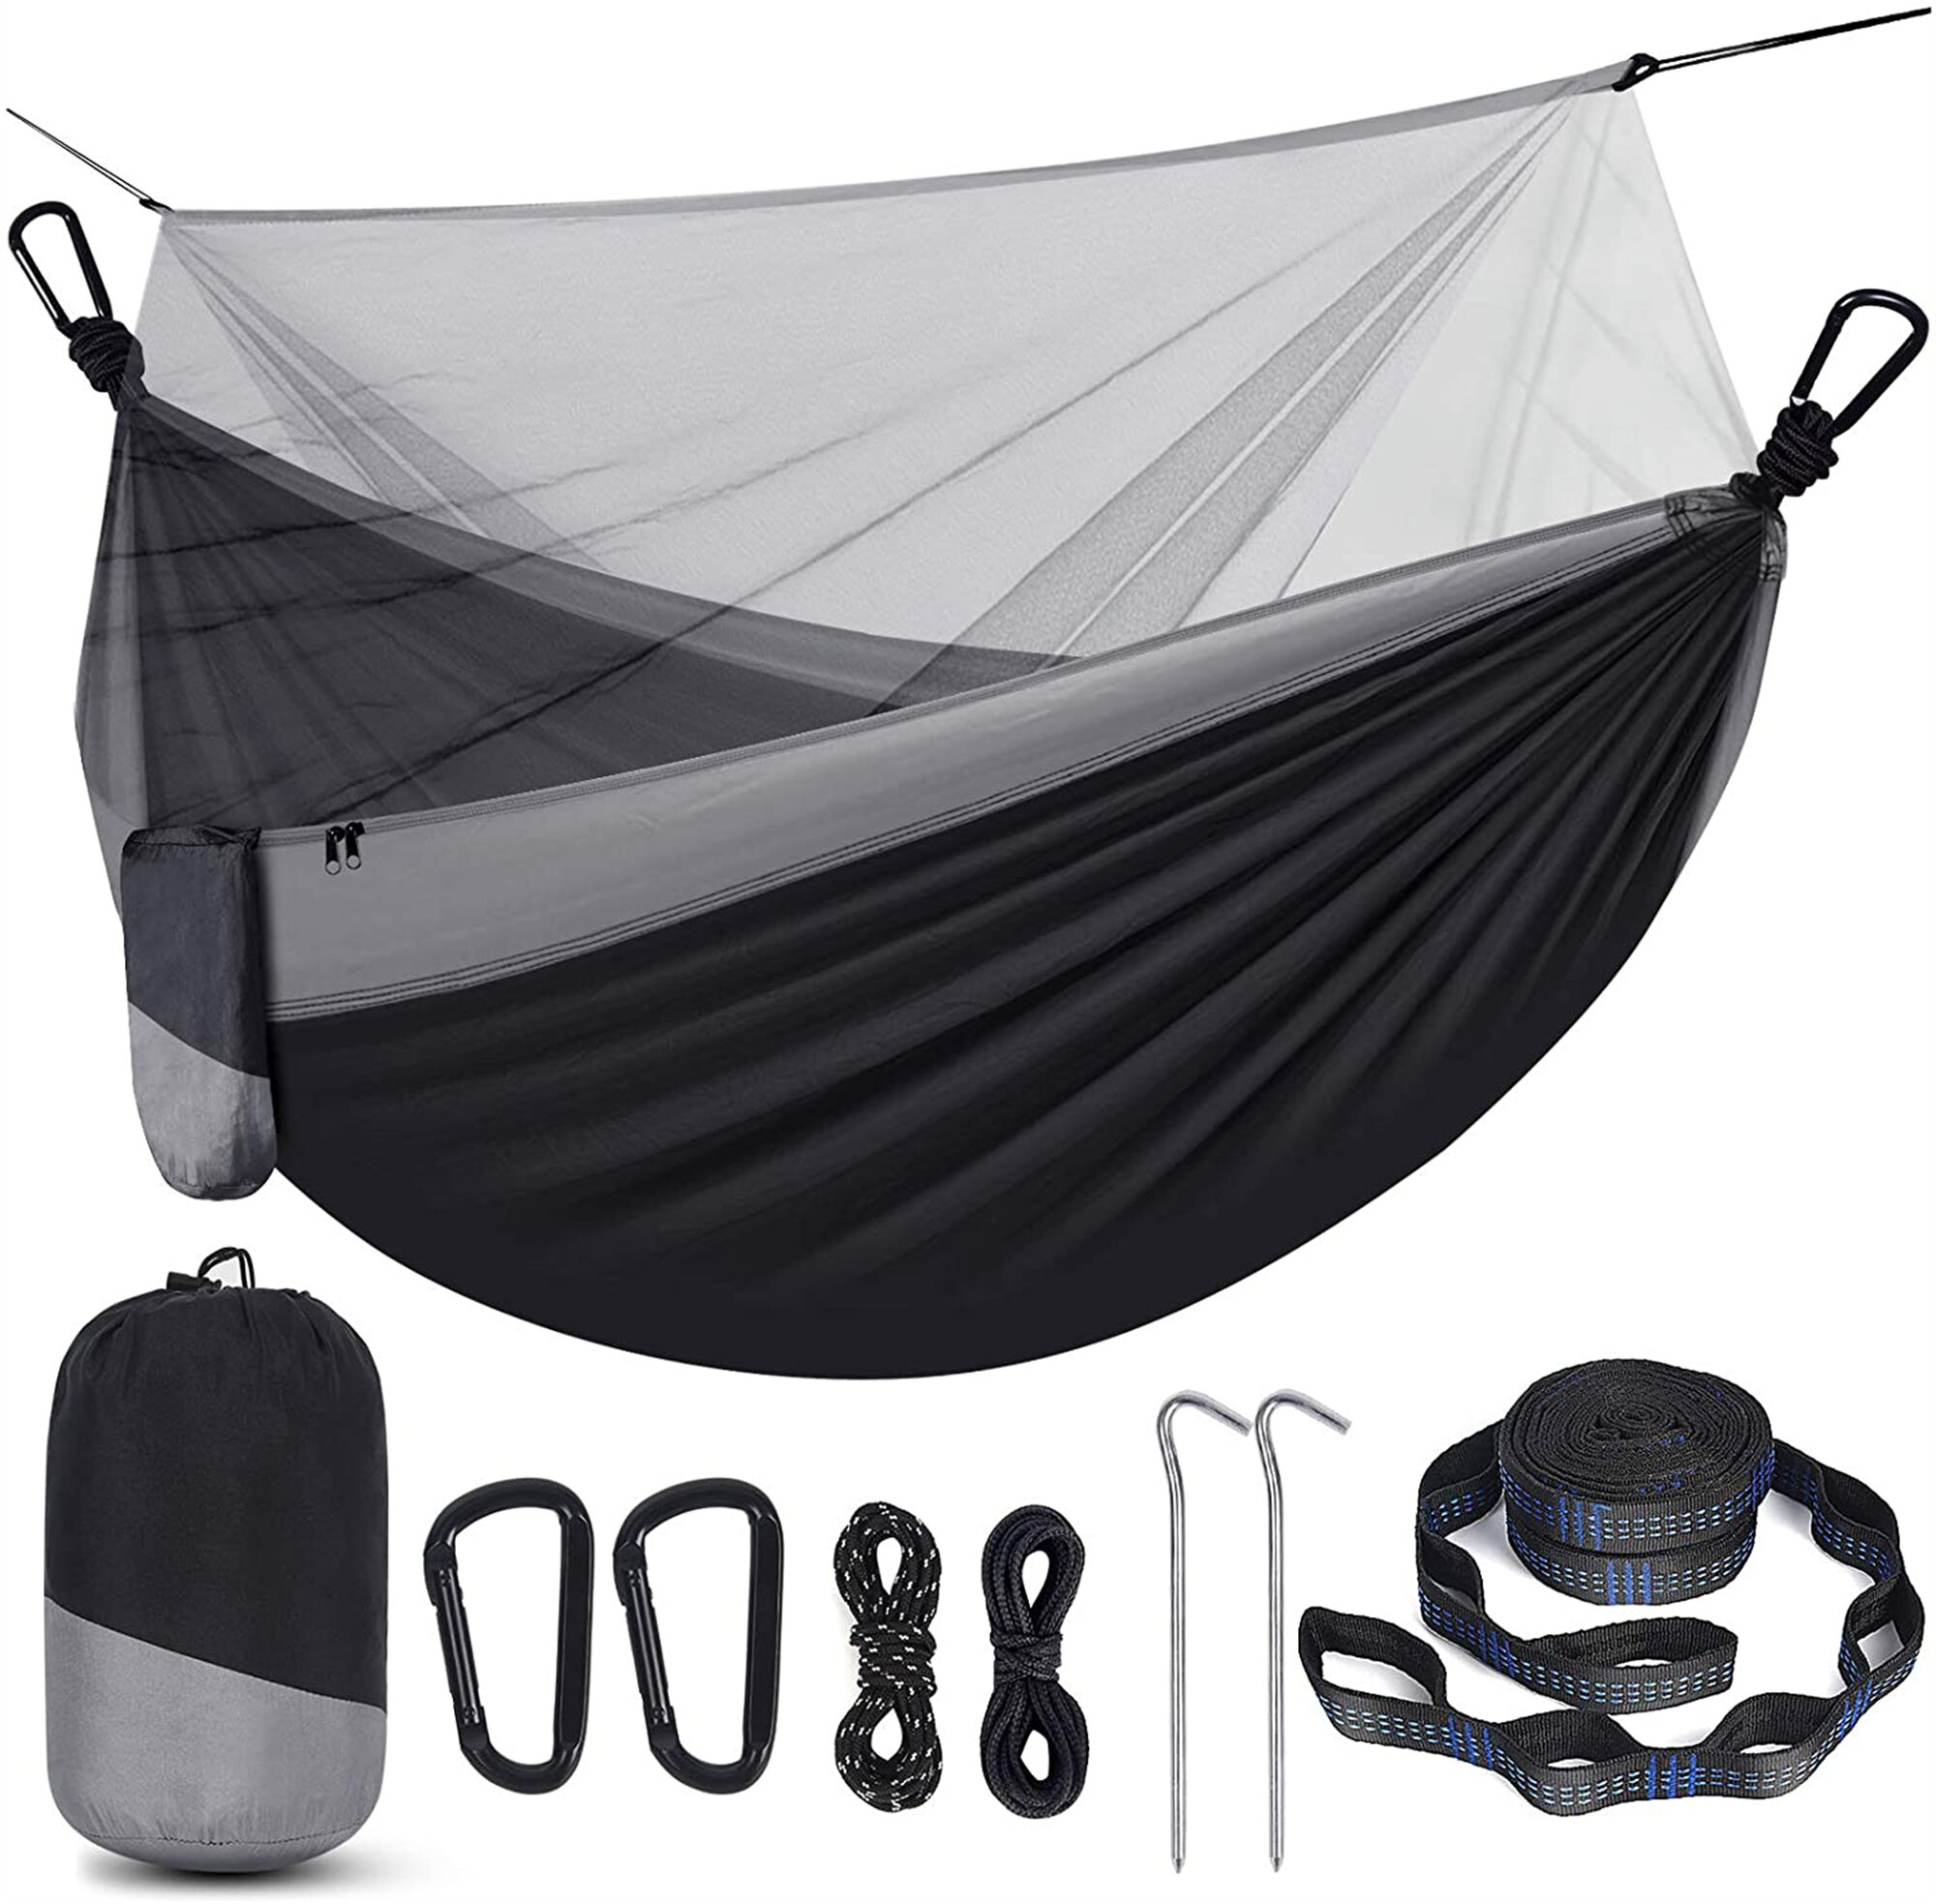 SONG Camping Hammock,with Mosquito Net Double Hammock,Lightweight Nylon Parachute Hammocks,for Travel Color : Black Yard Beach 